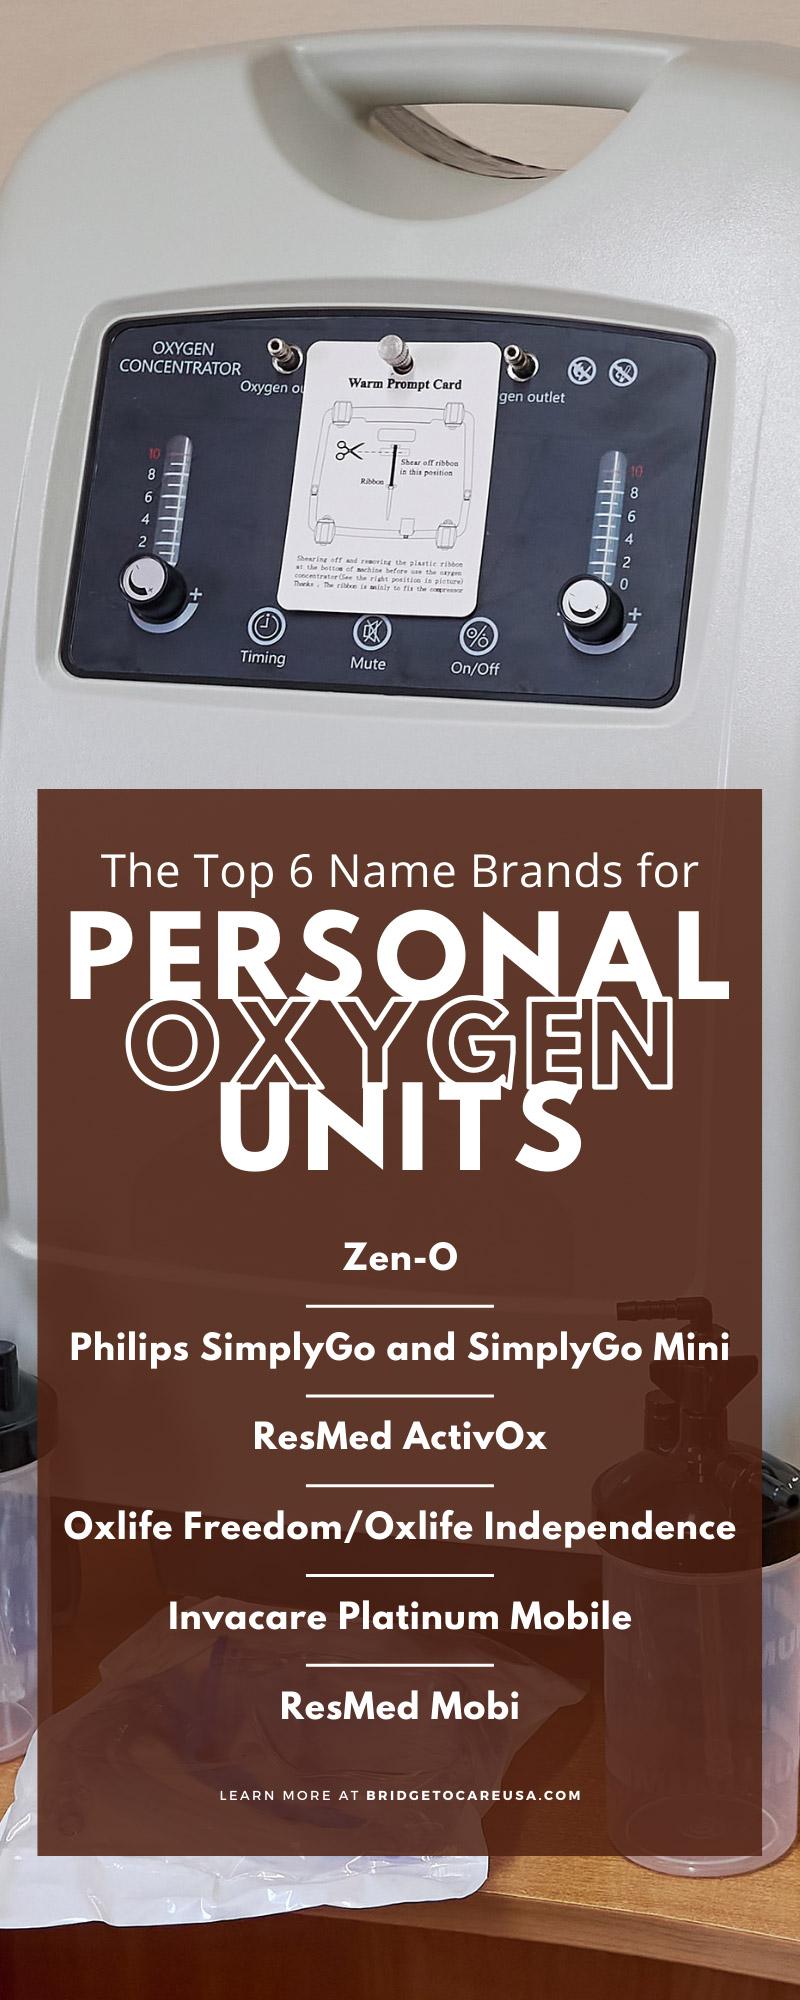 The Top 6 Name Brands for Personal Oxygen Units